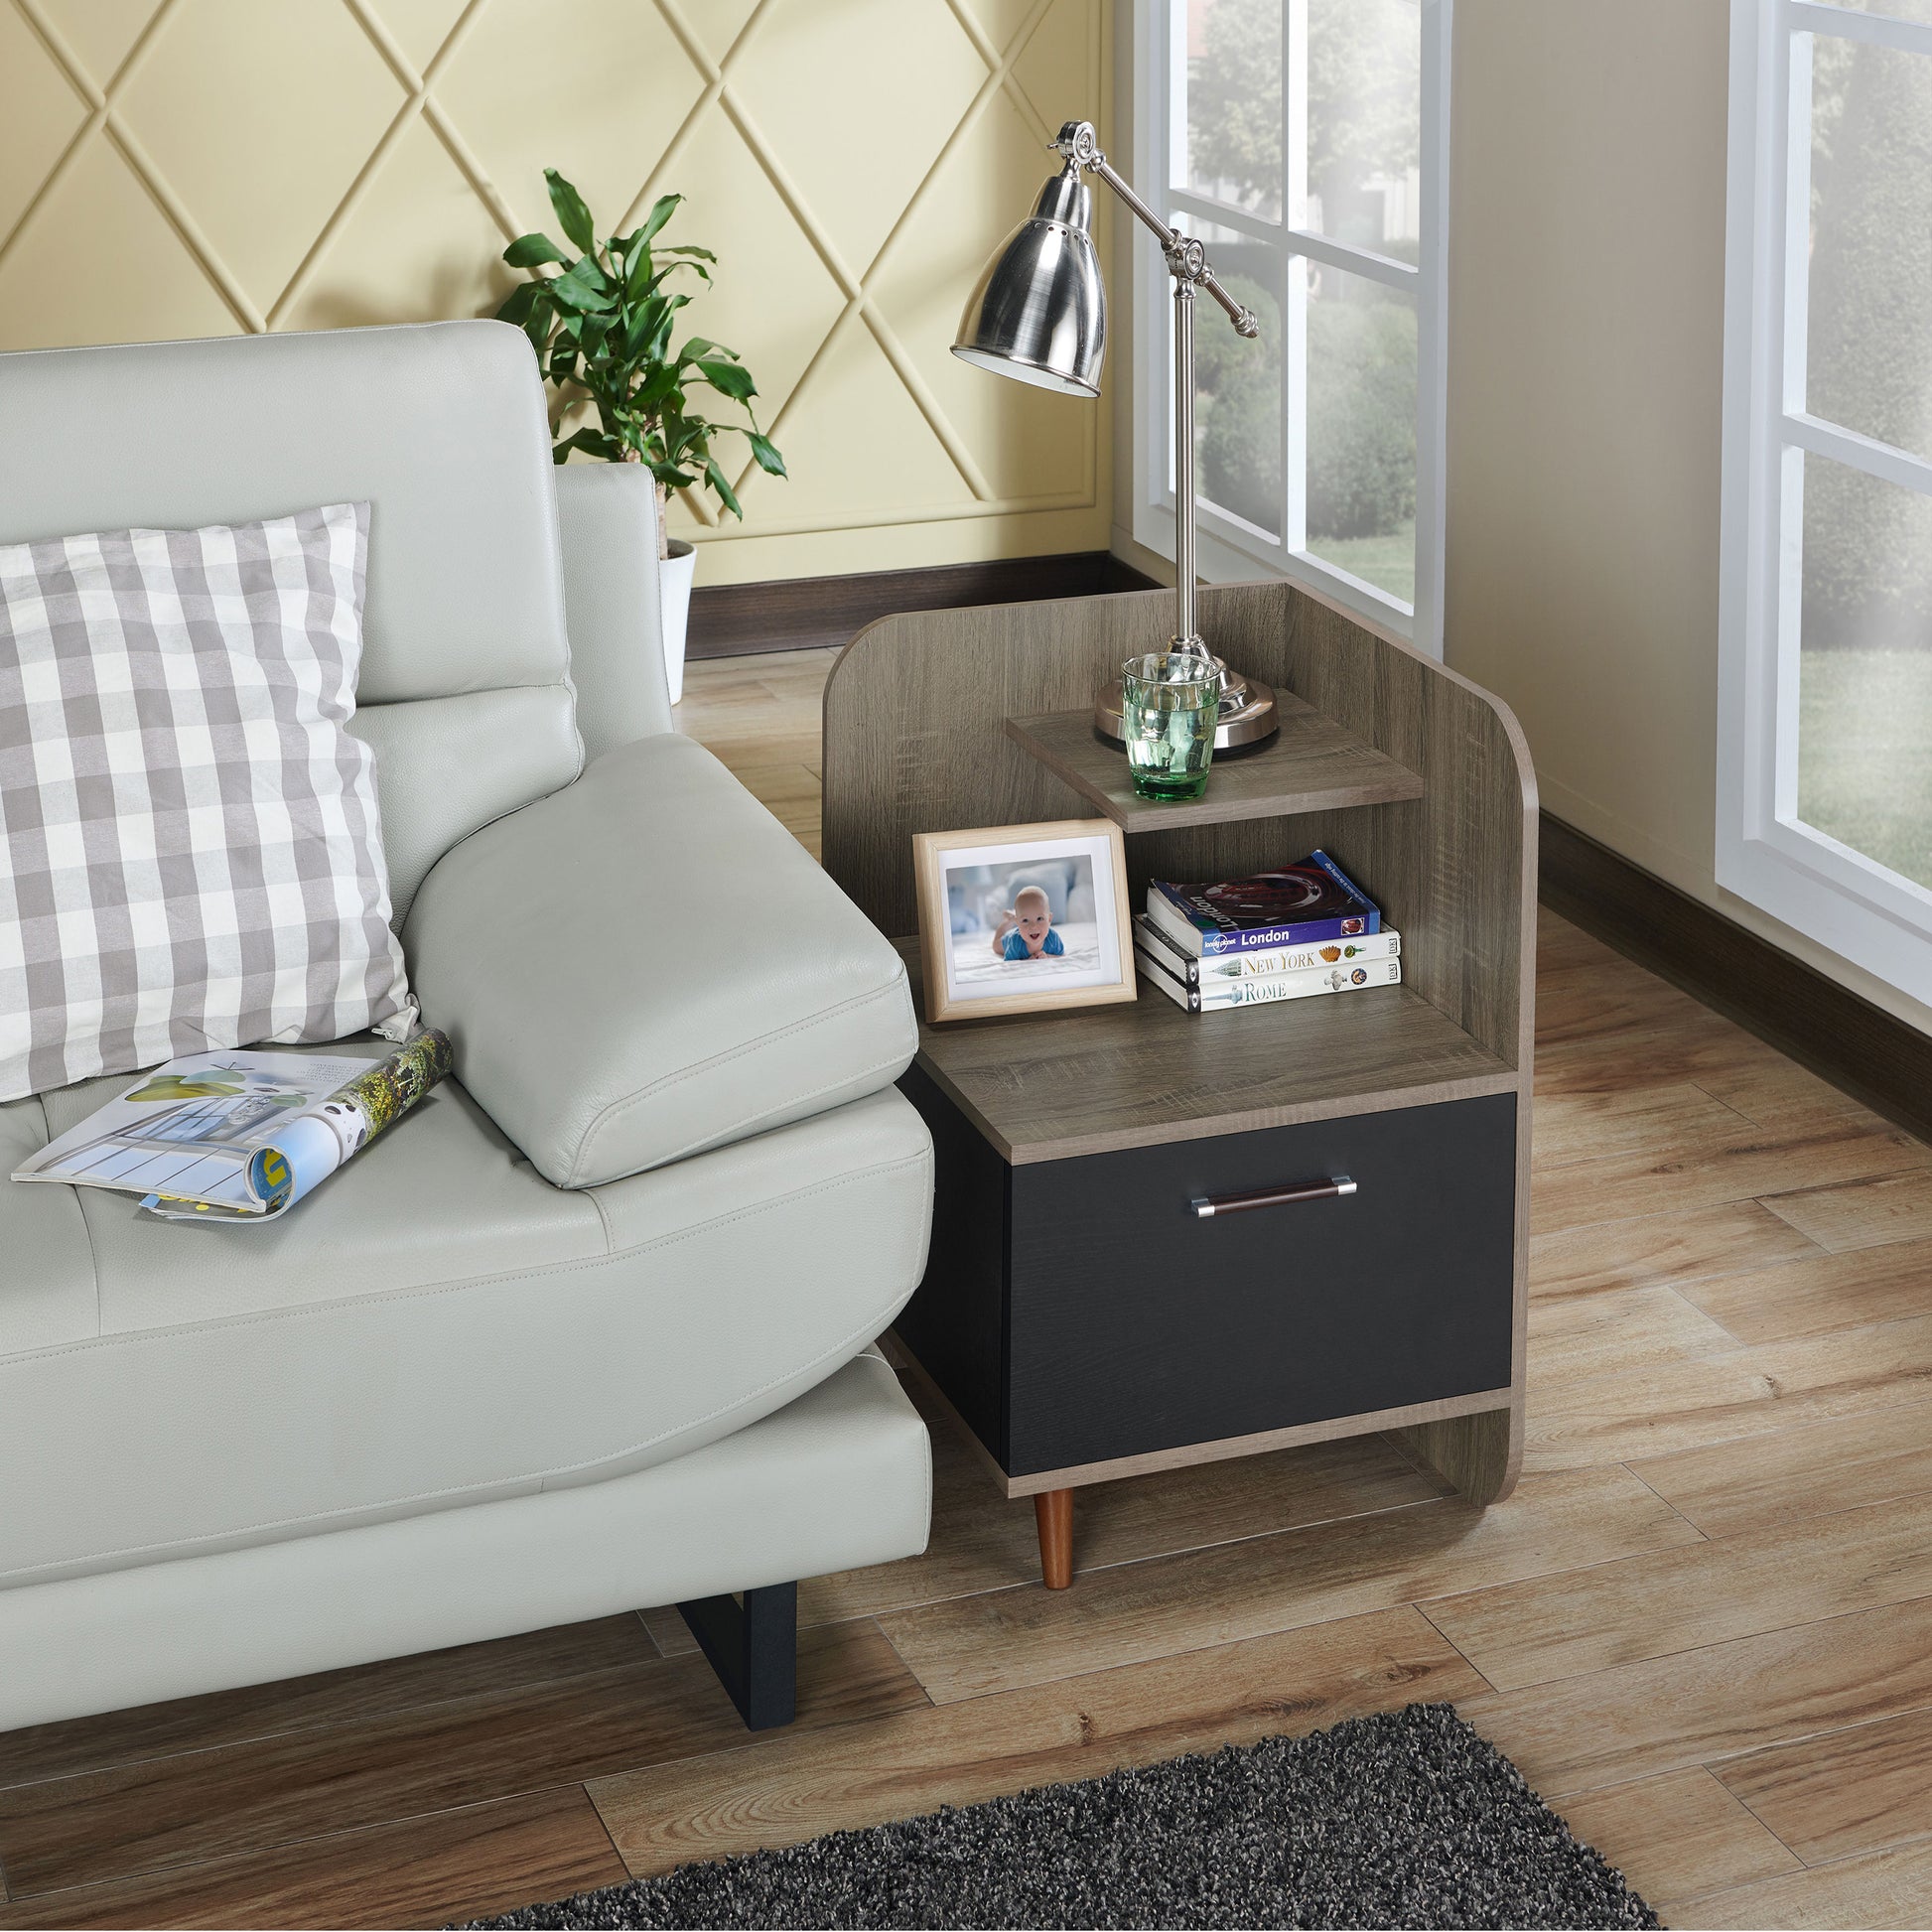 Right angled contemporary chestnut brown one-drawer nightstand with a mini shelf in a living room with accessories